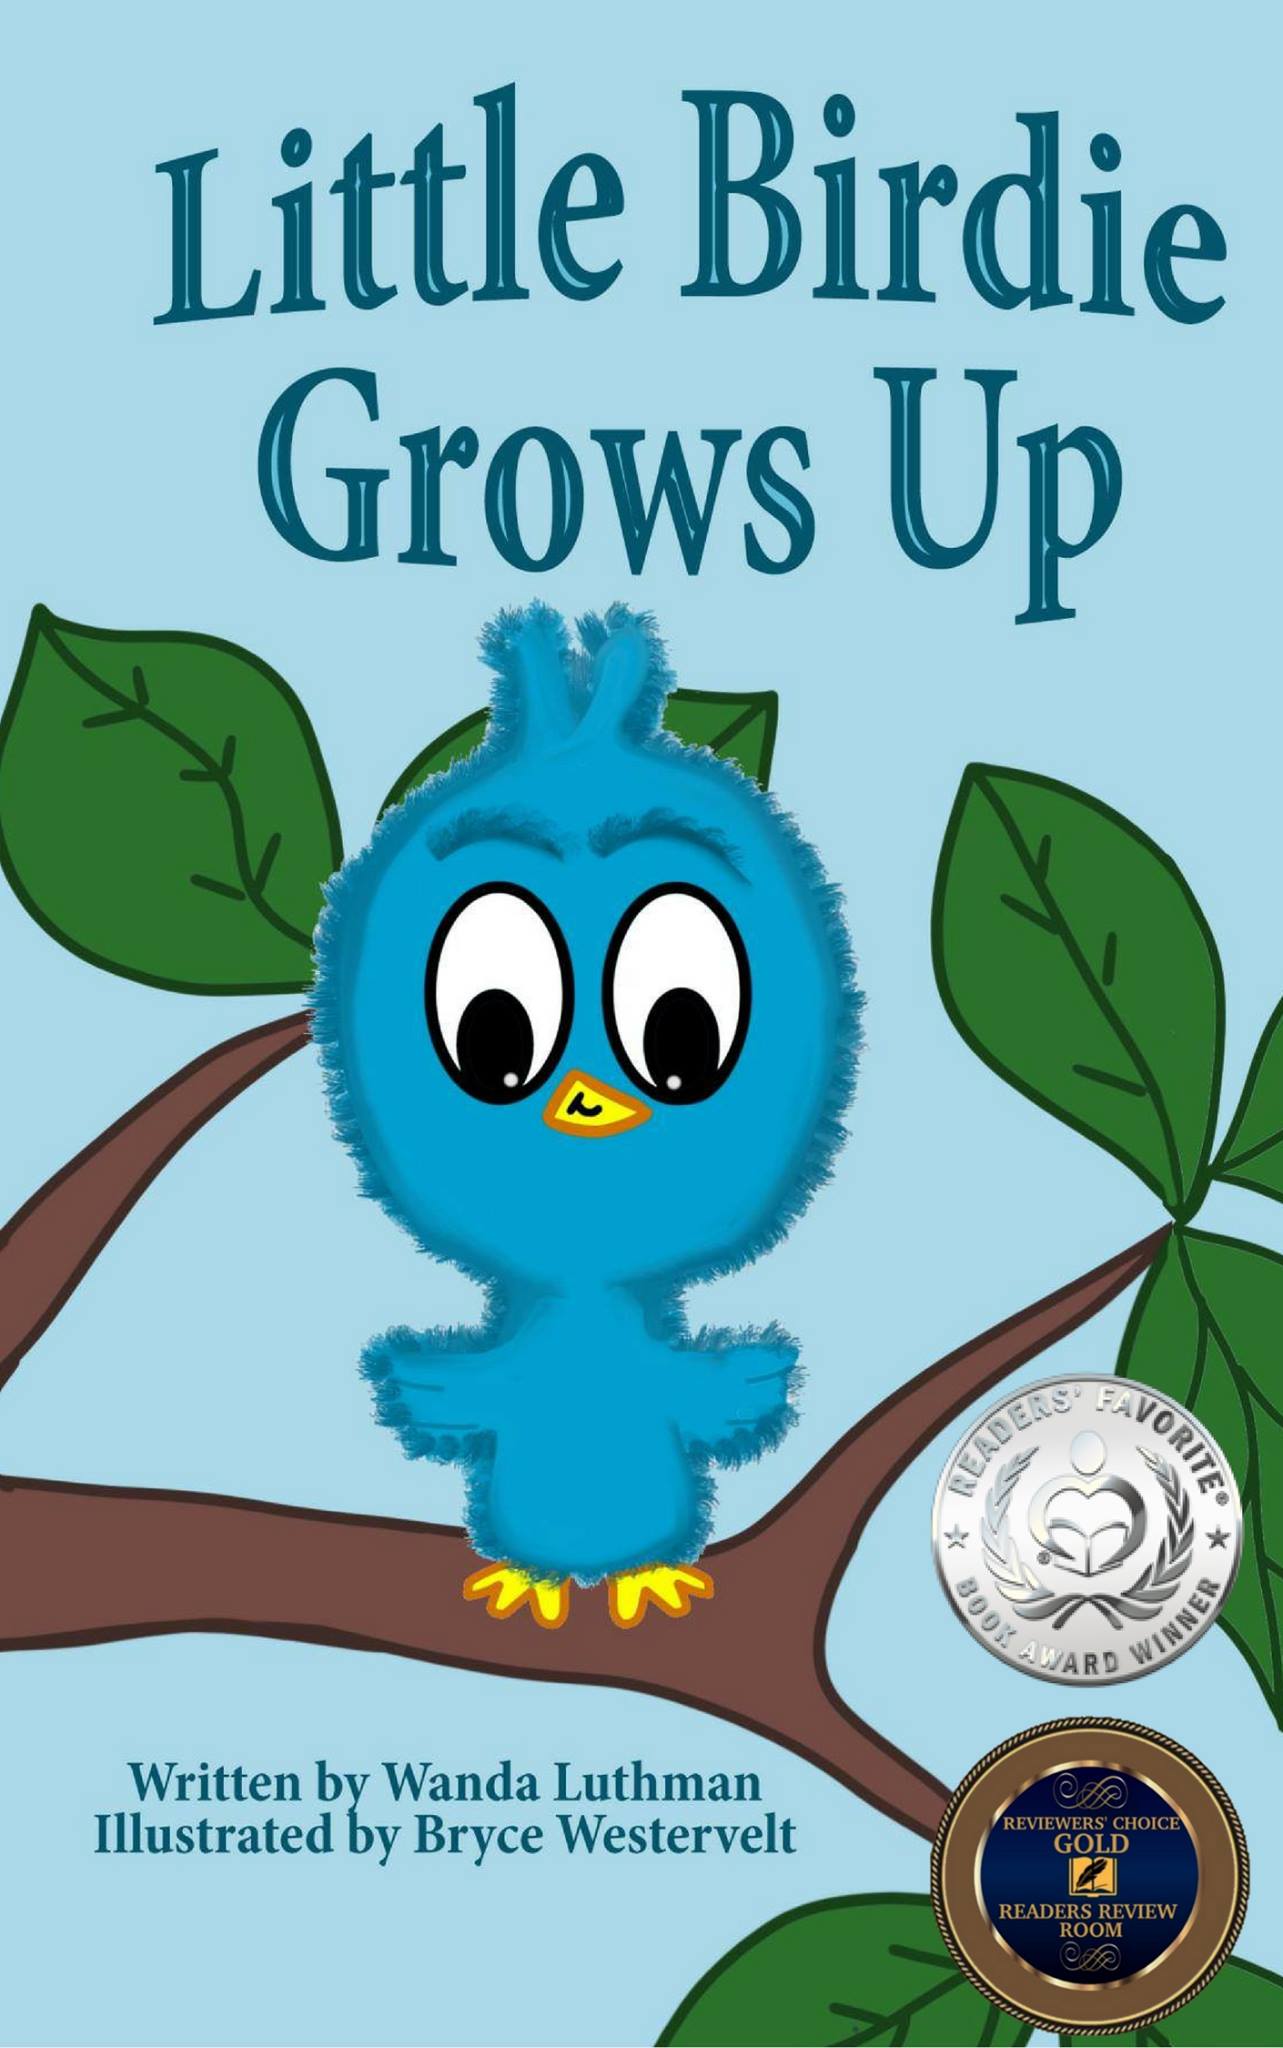 Little Birdie Grows Up, a picture book, by Wanda Luthman showing Readers' Favorite Silver Medal Award 2017 and Gold Badge (highest rank) from Readers Review Room (2017)